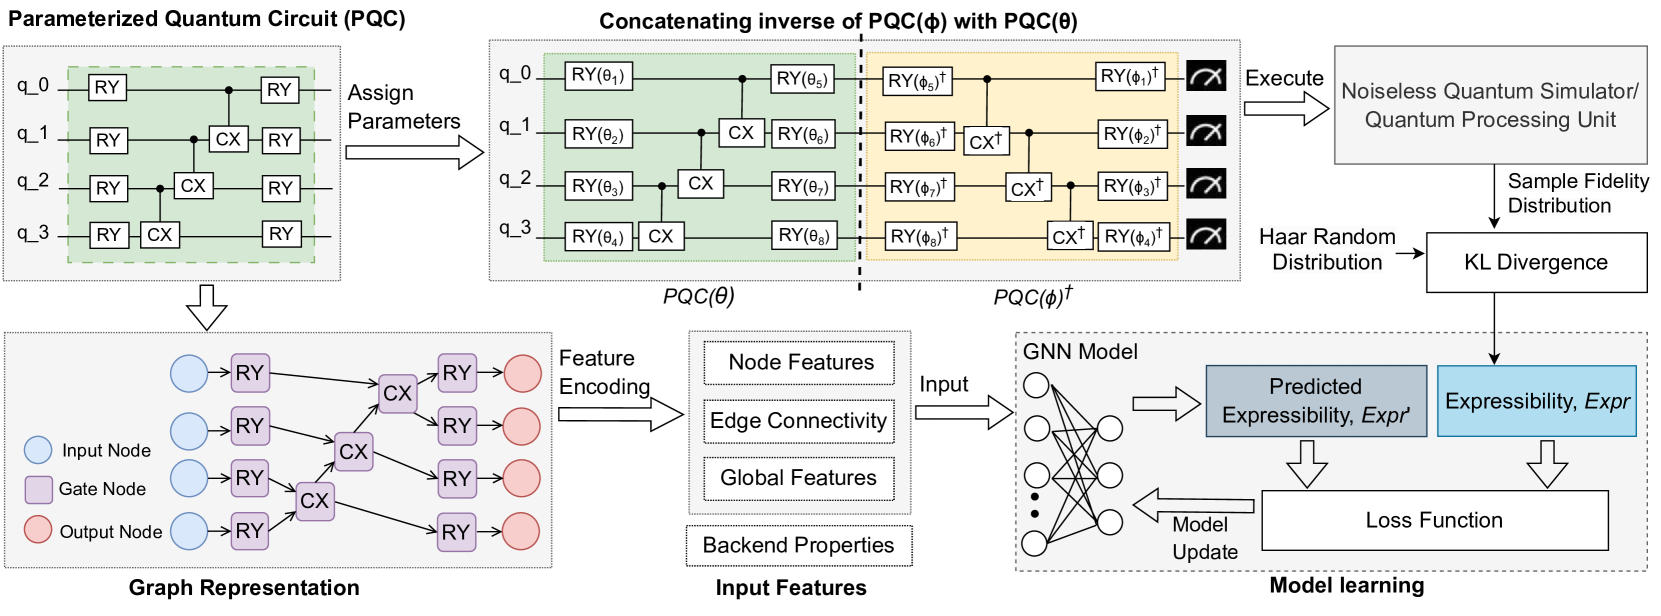 Graph Neural Networks for Parameterized Quantum Circuits Expressibility Estimation